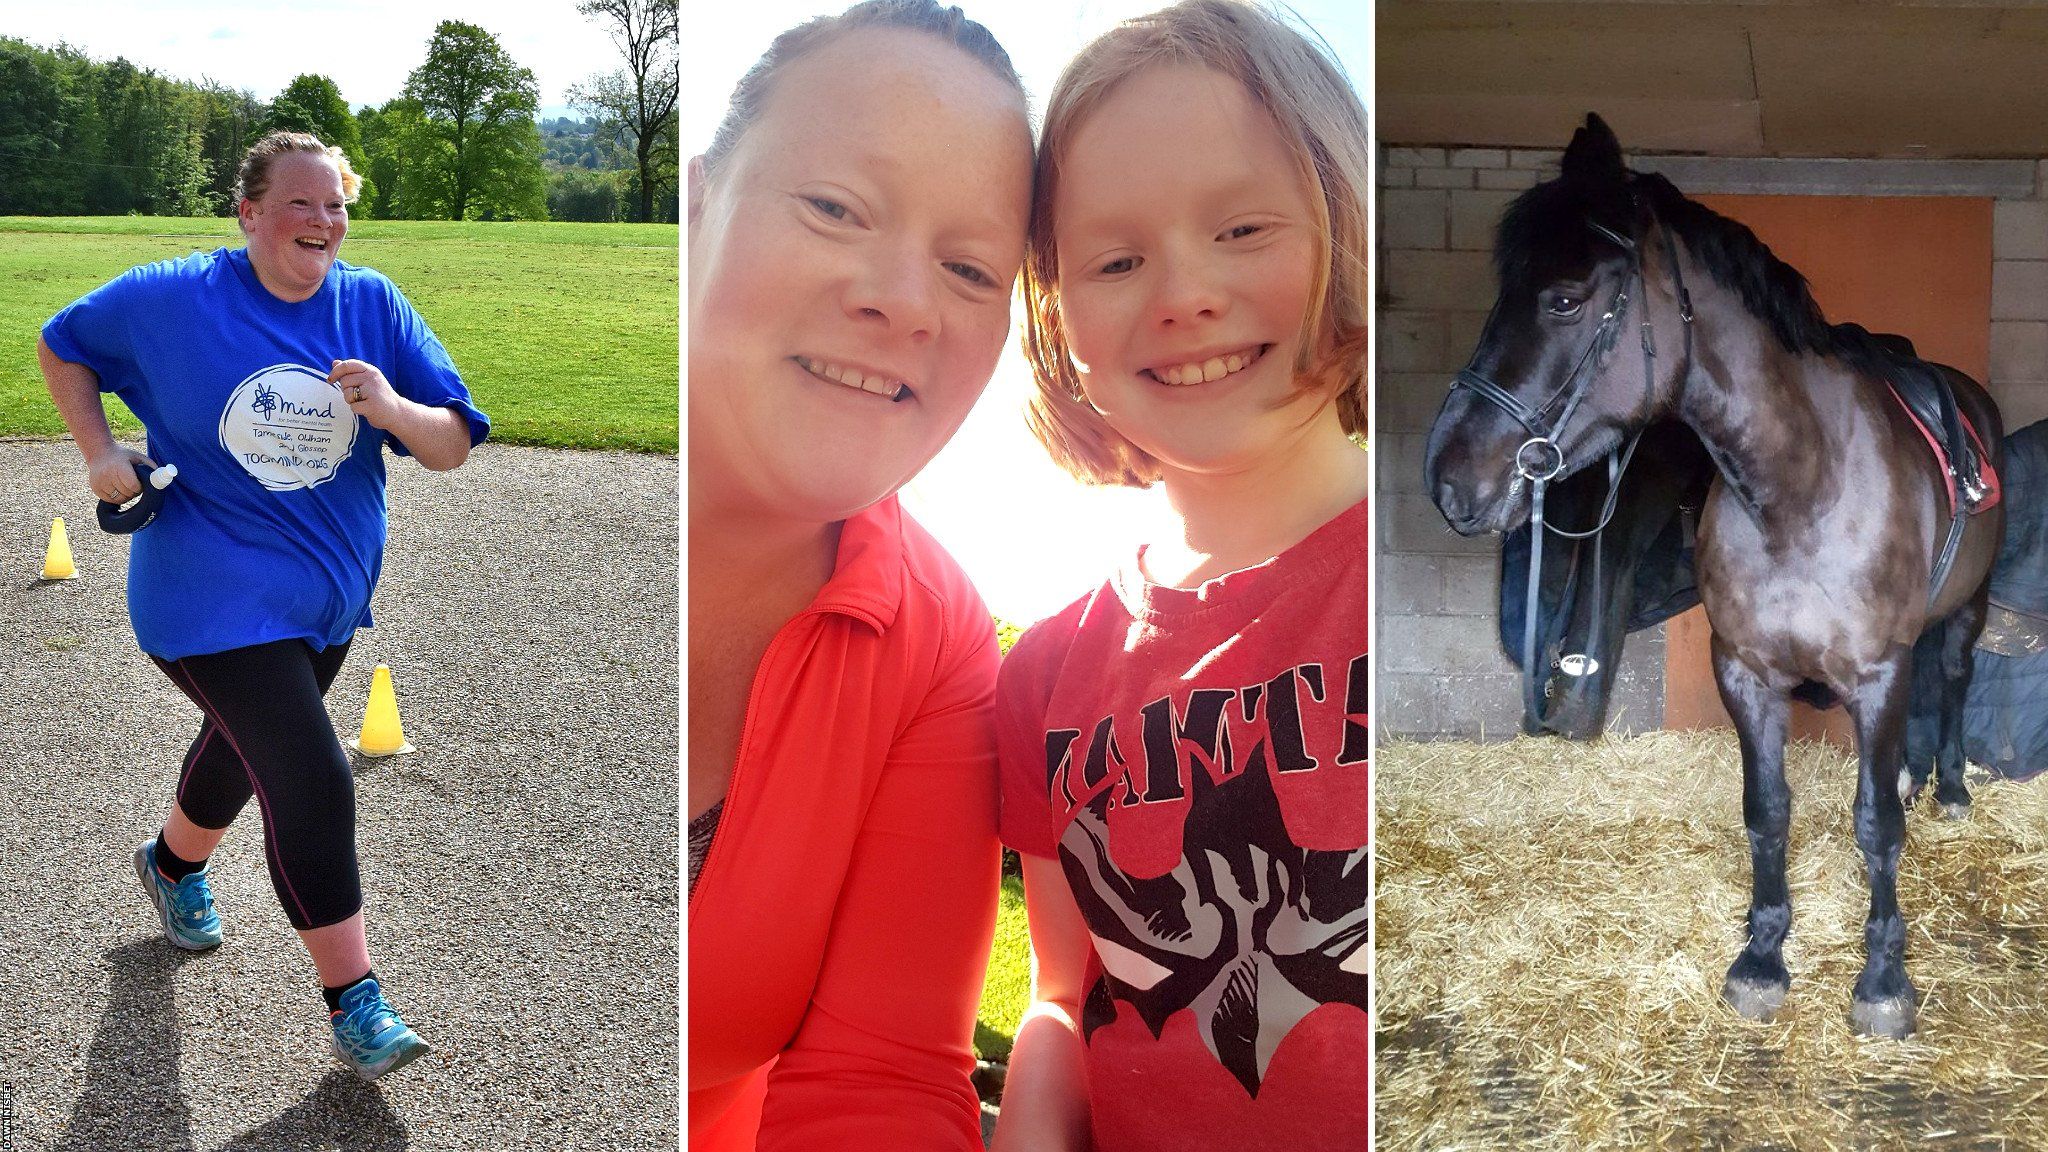 Dawn Nisbet (from left to right): during a parkrun, with her daughter at a junior parkrun, horse she rides